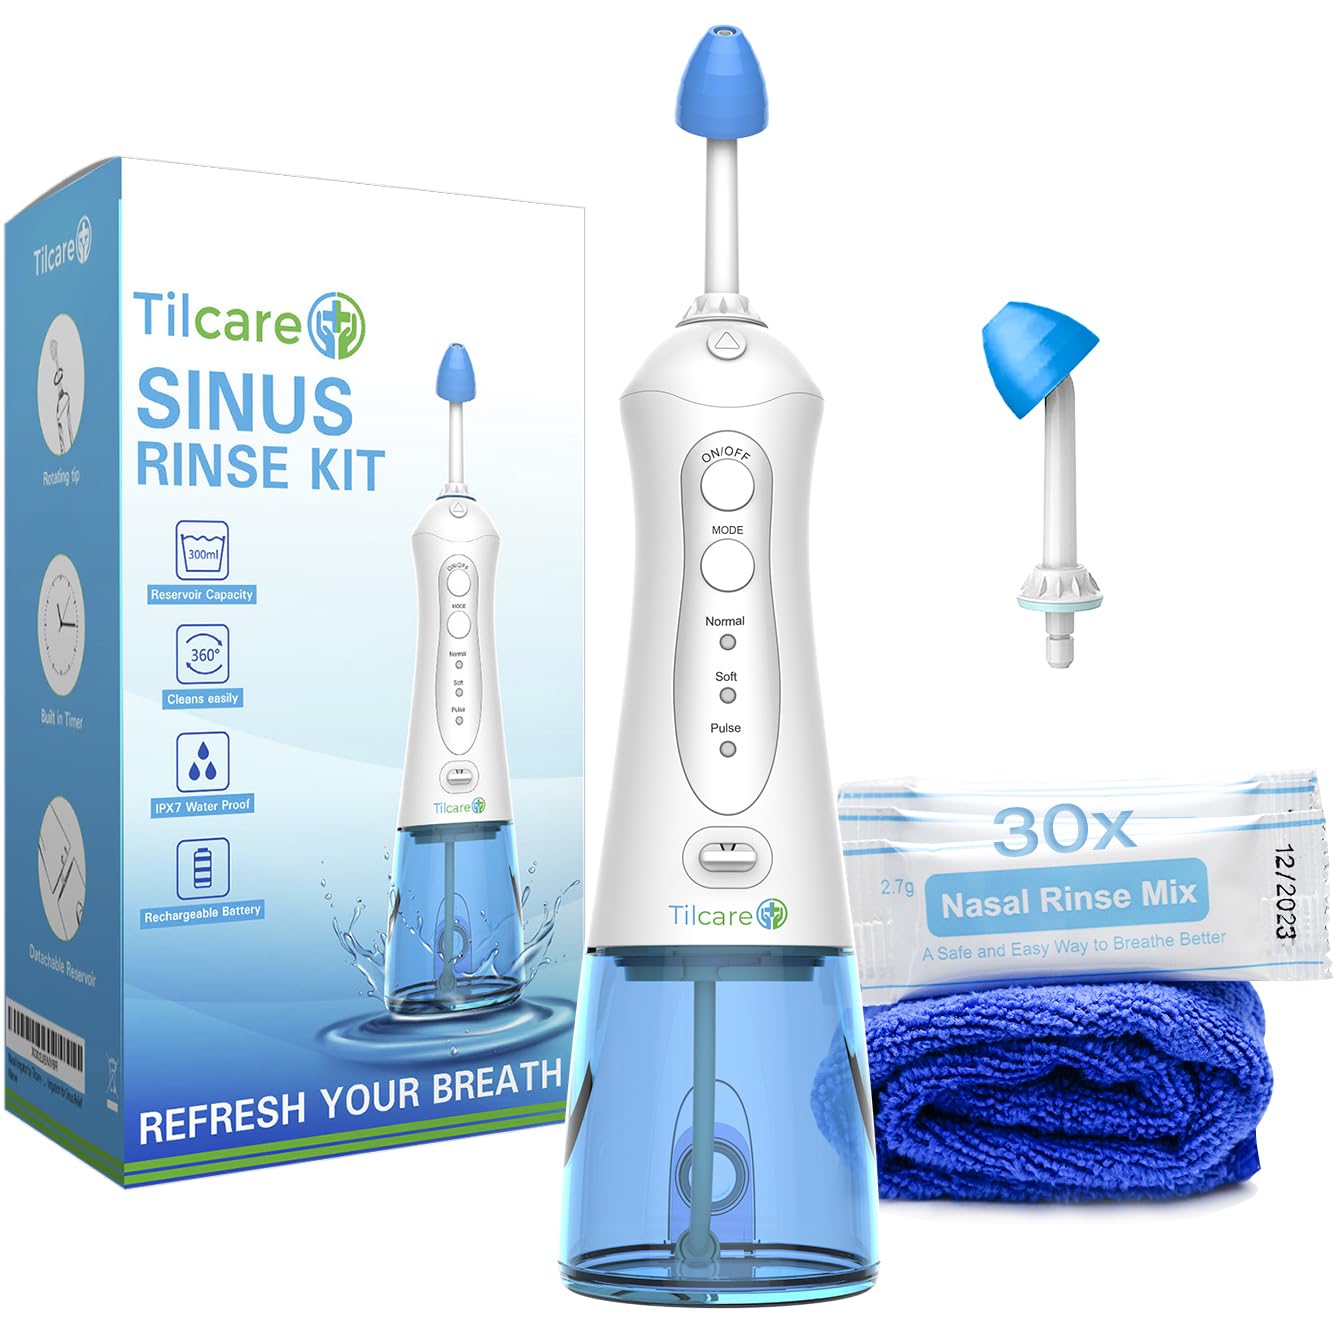 Tilcare Sinus Rinse Kit Perfect Nasal Rinse Machine for Sinus & Allergy Relief - Electric Neti Pot for Nasal Irrigation That Wil